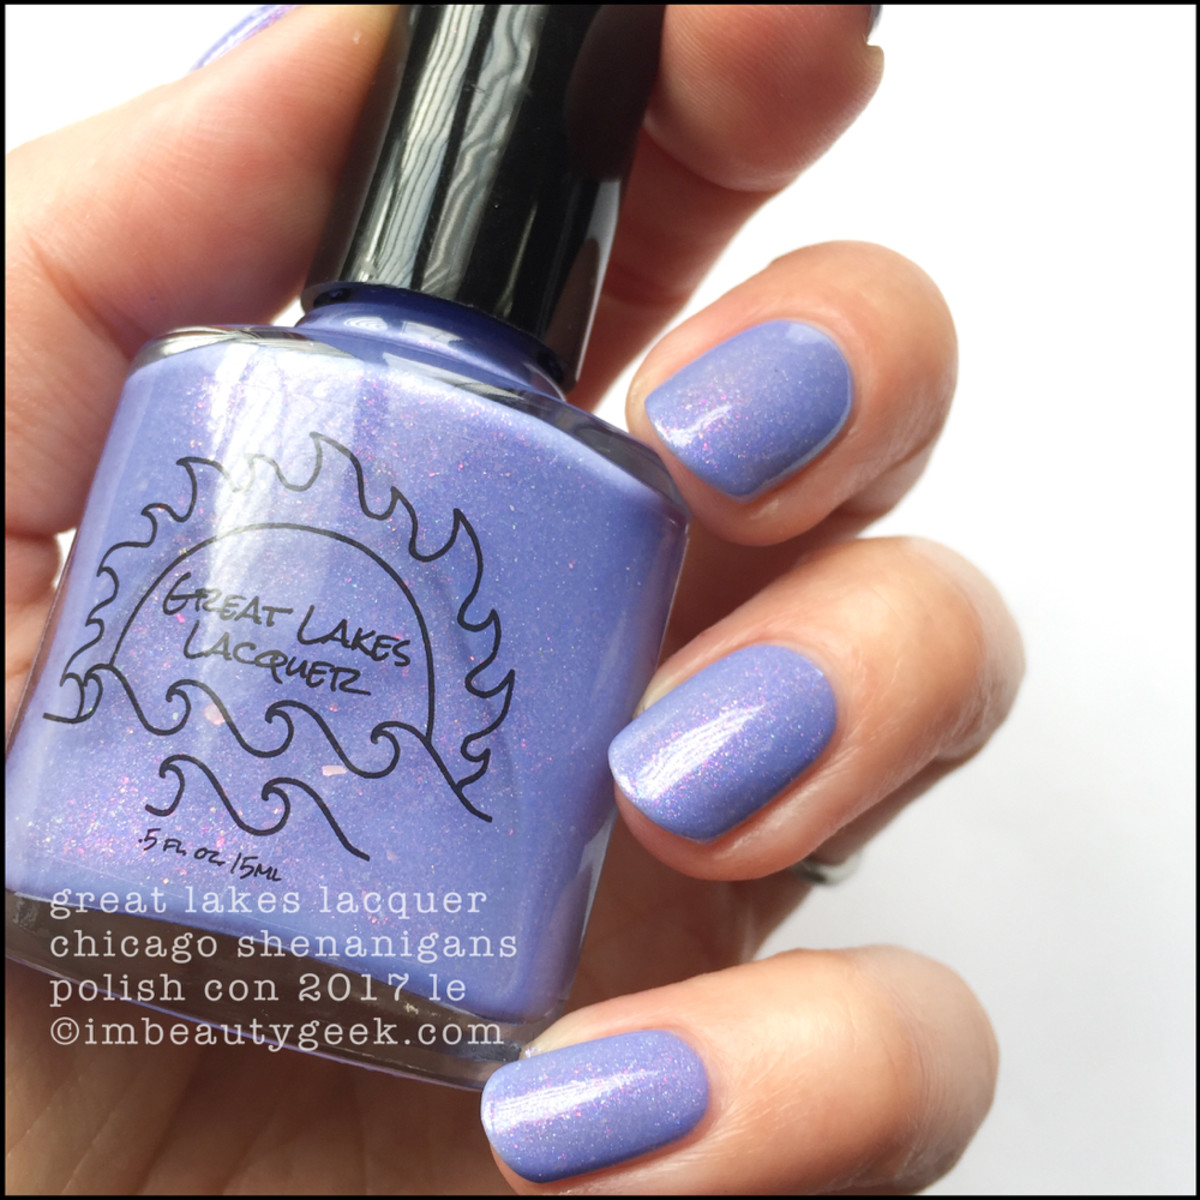 Great Lakes Lacquer Chicago Shenanigans _ Great Lakes Lacquer Polish Con 2017 Limited Editions